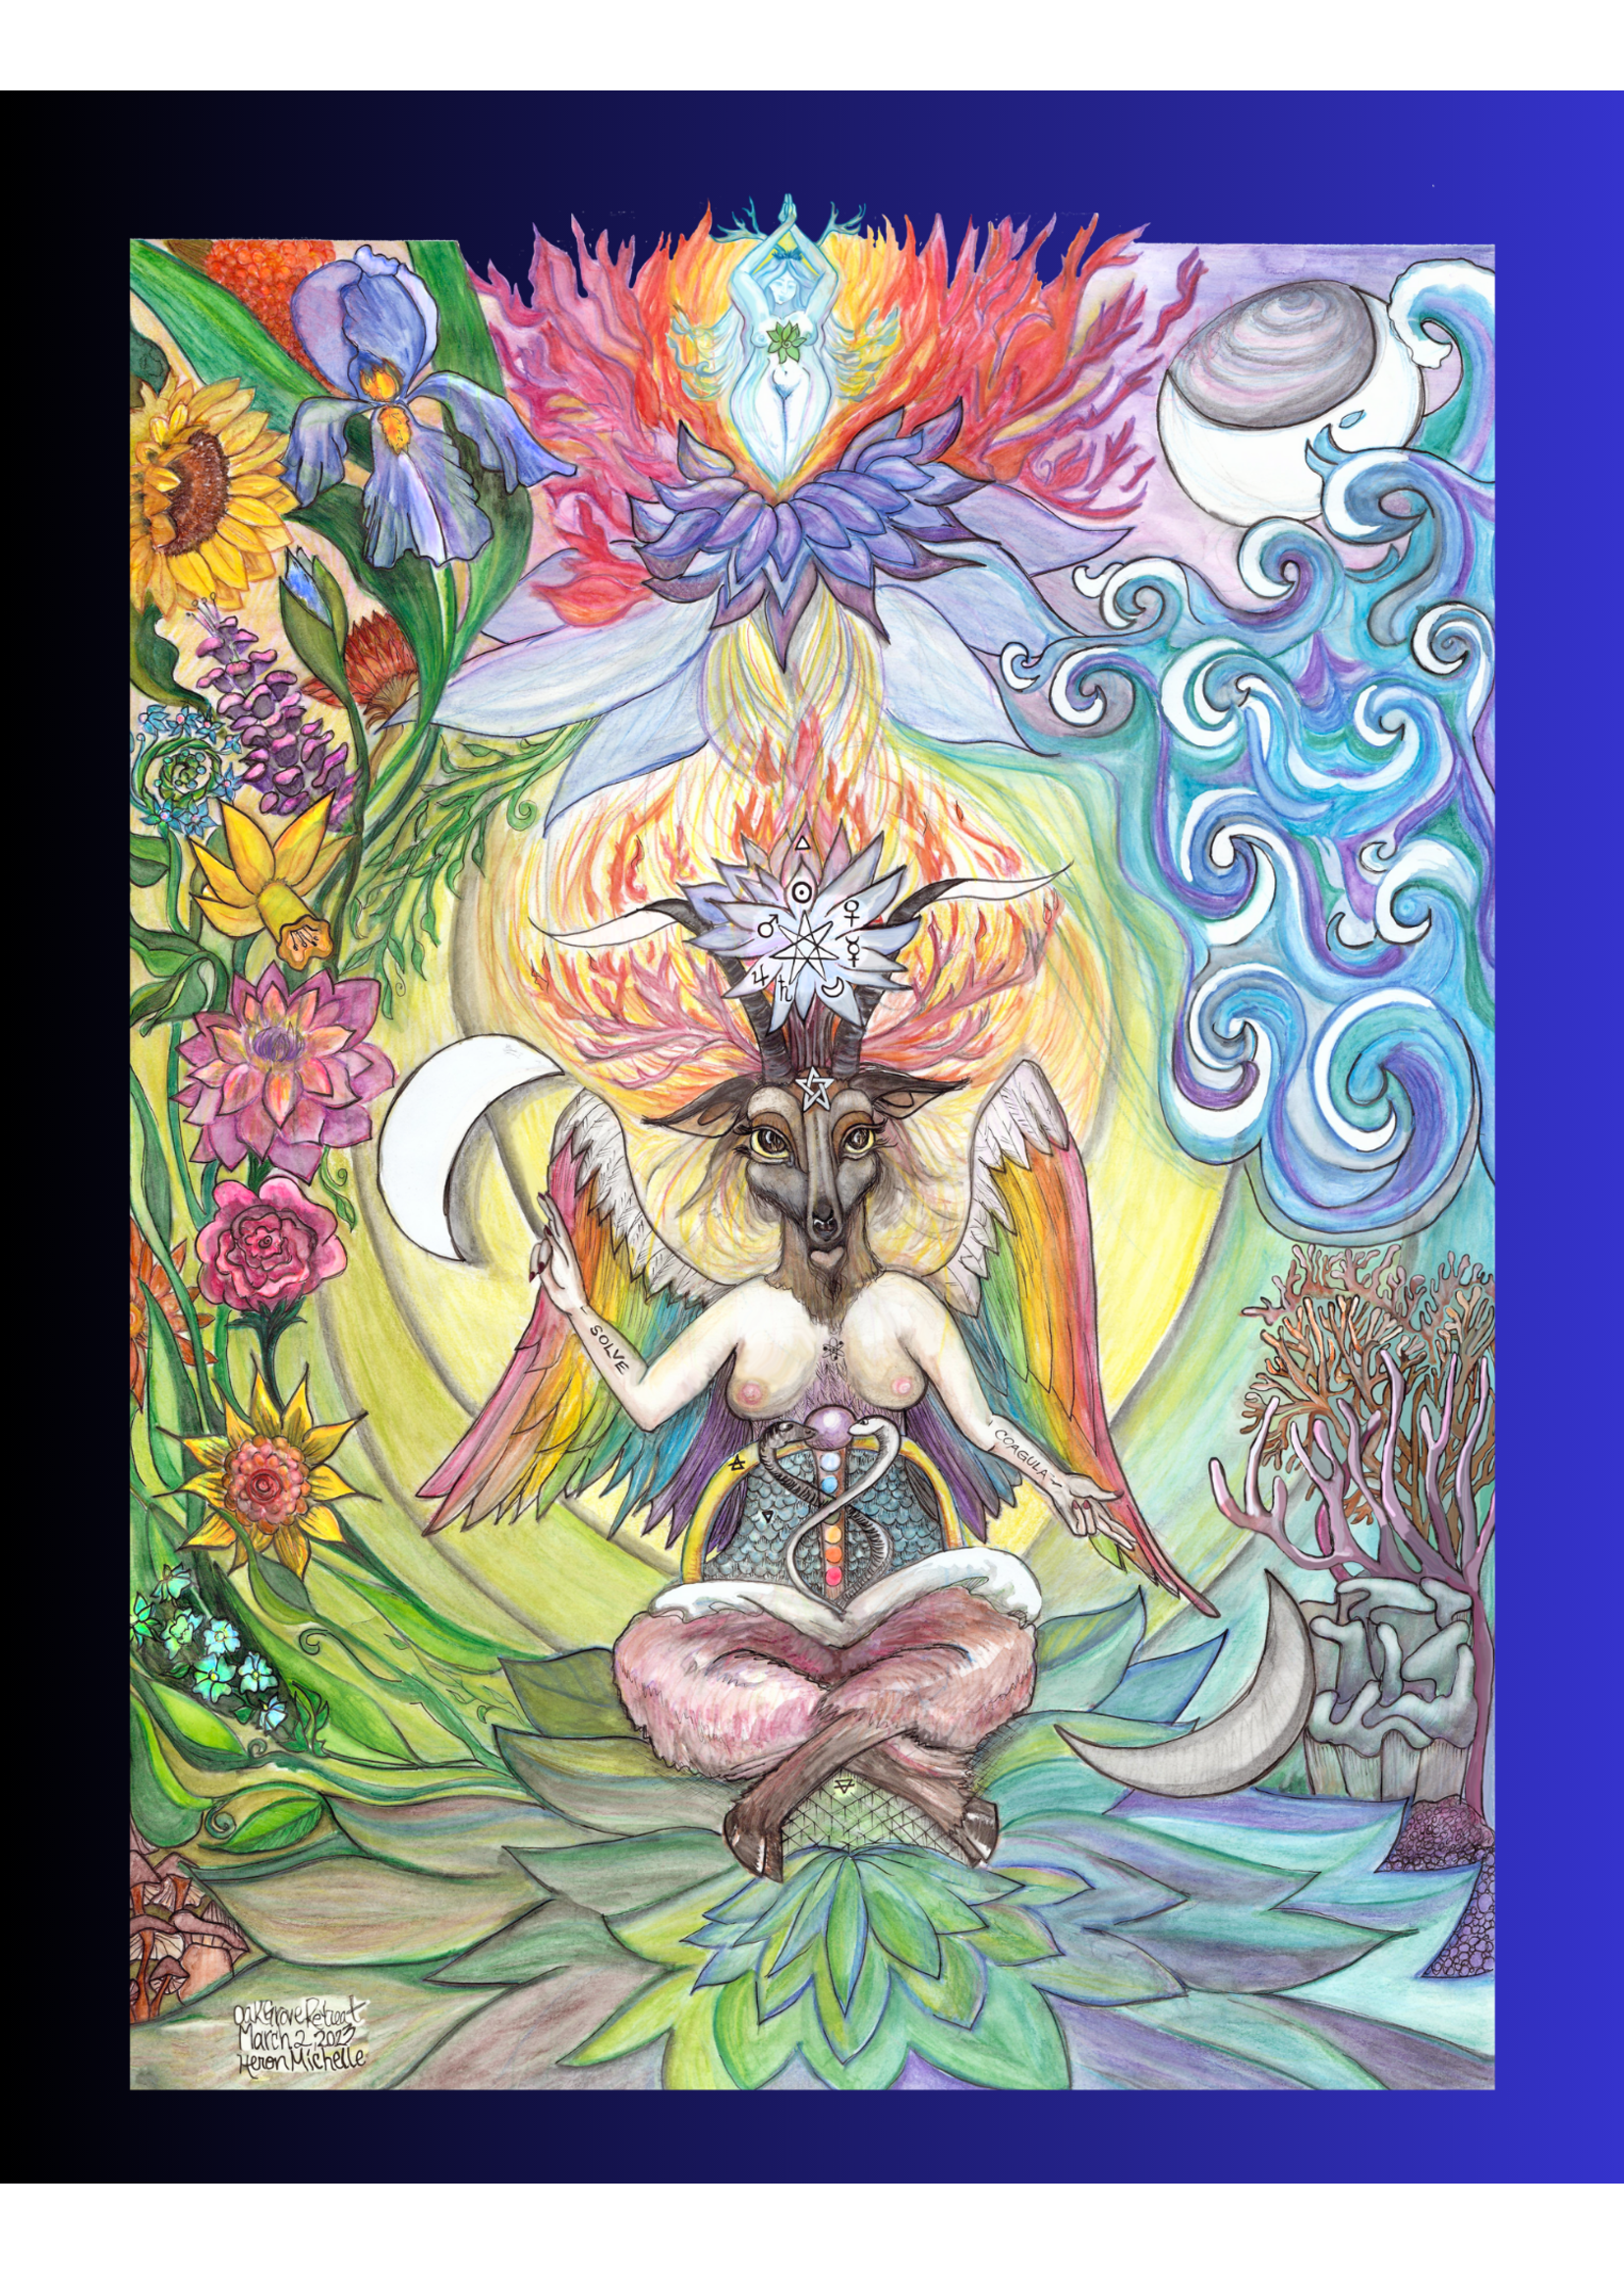 Desire's Attainment Baphomet Poster by Heron Michelle